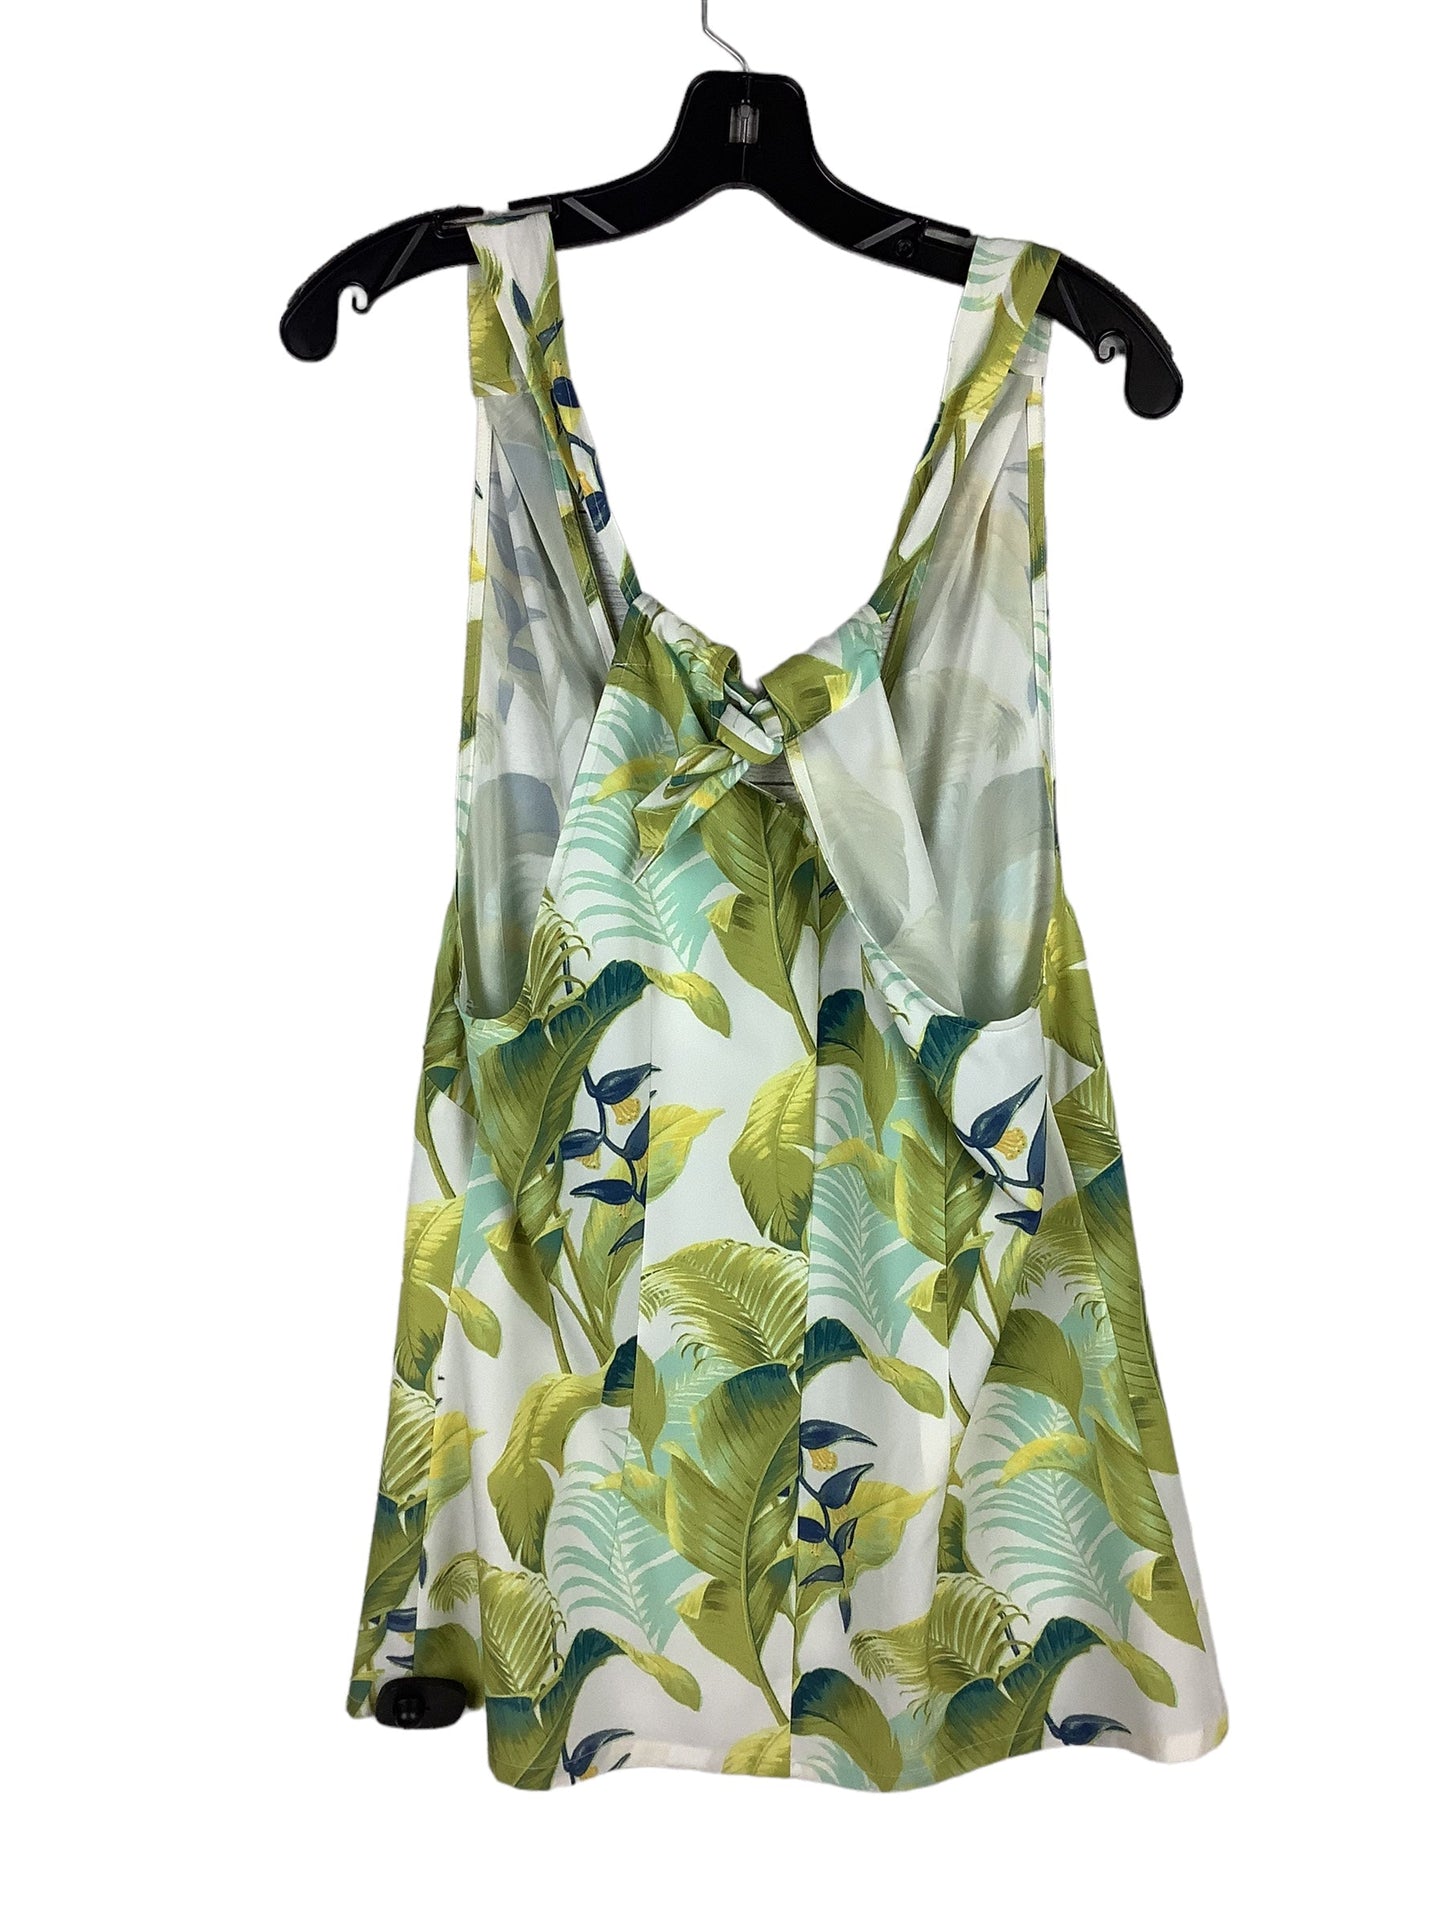 Top Sleeveless By Tommy Bahama  Size: S